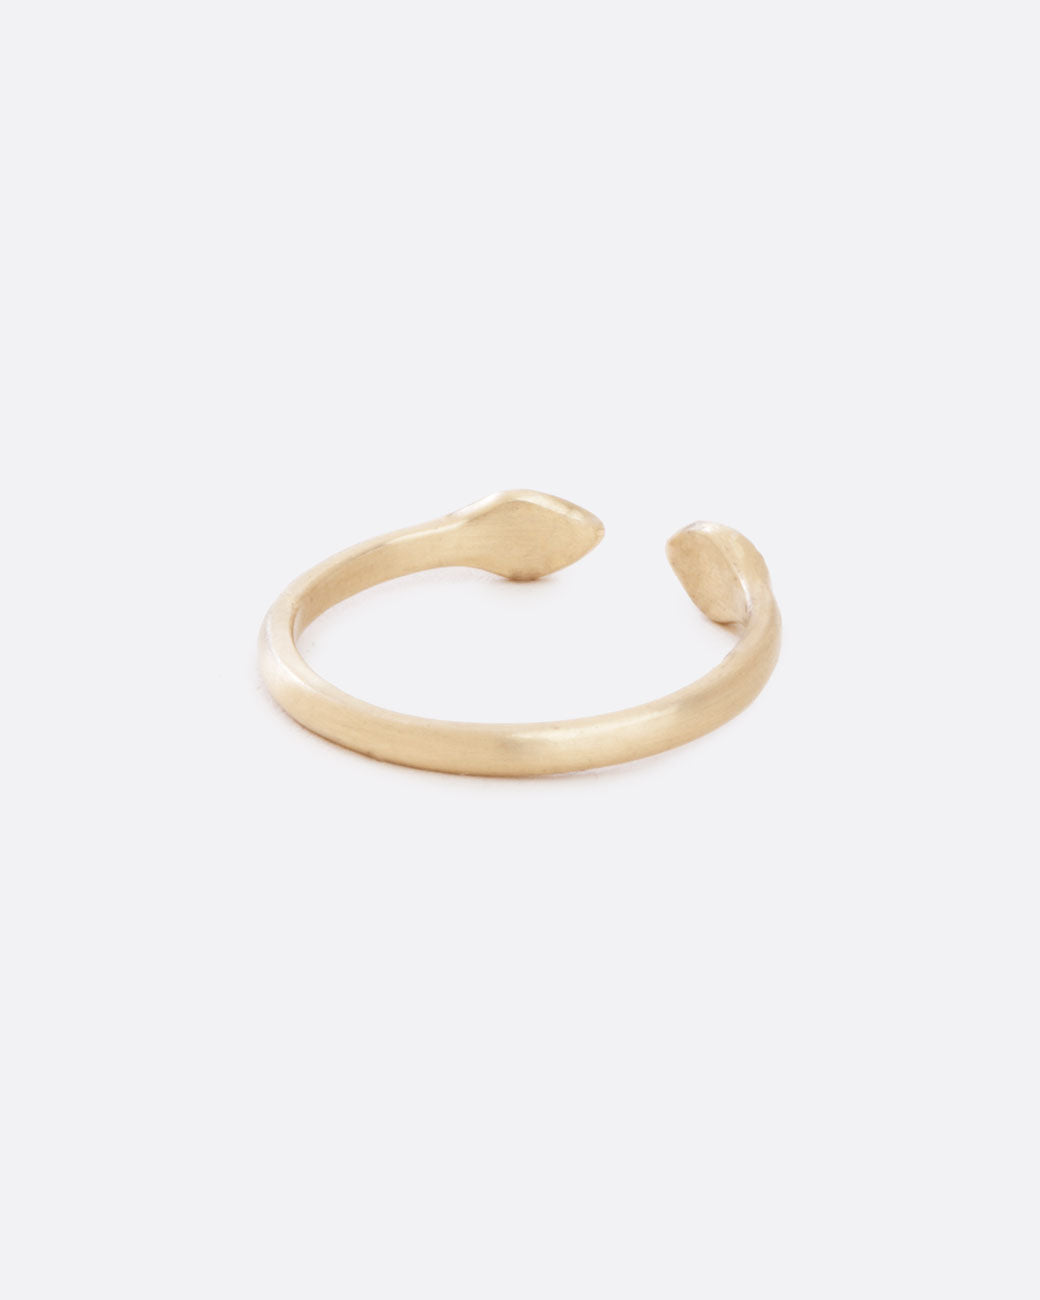 A back view of a simple and matte ring with an open front. The front pieces are more bulbous than the band.